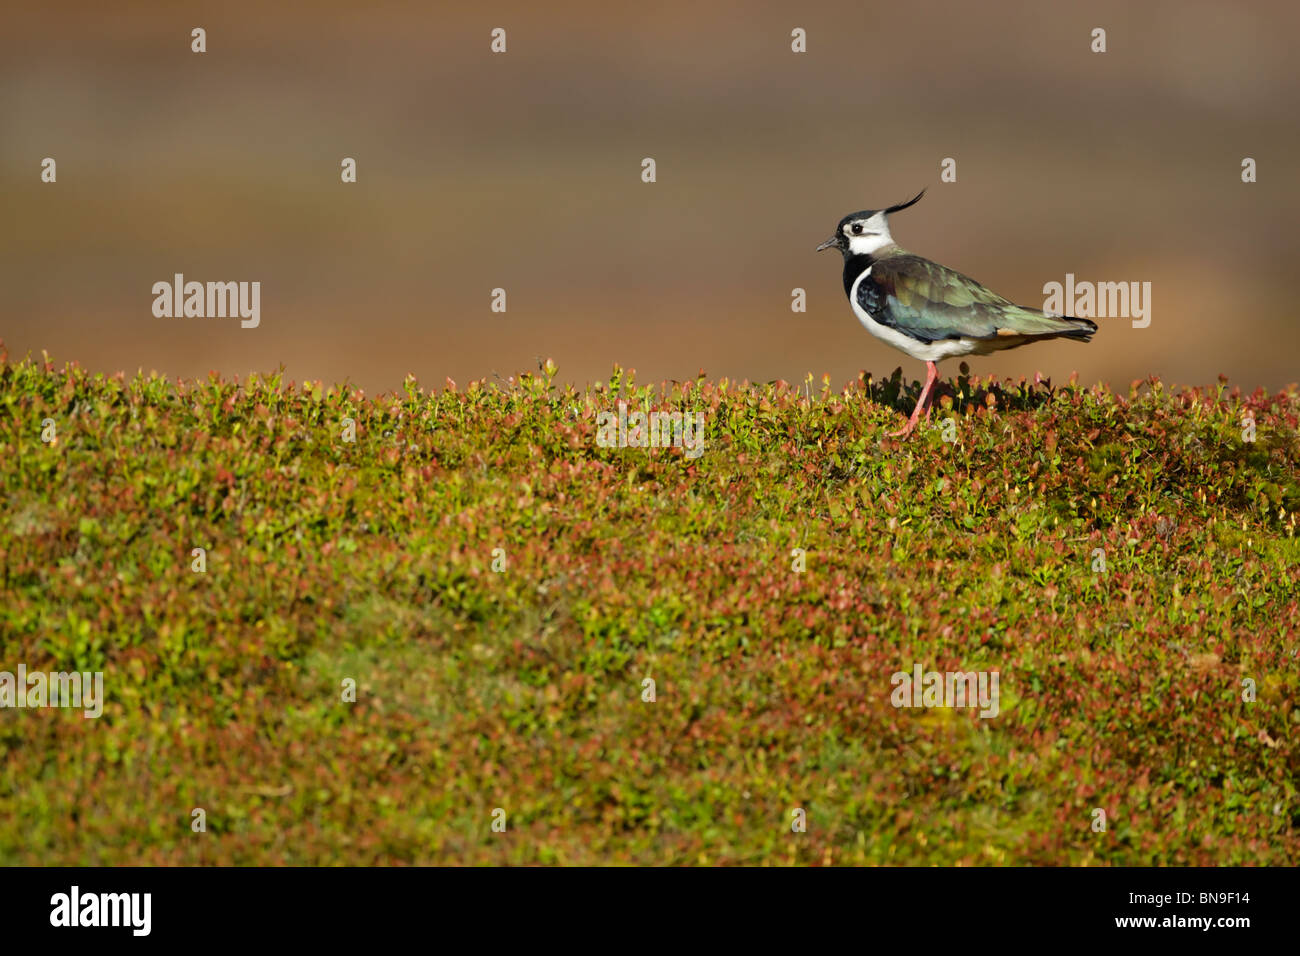 Lapwing (Vanellus vanellus) standing on moorland among bilberry plant leaves Stock Photo